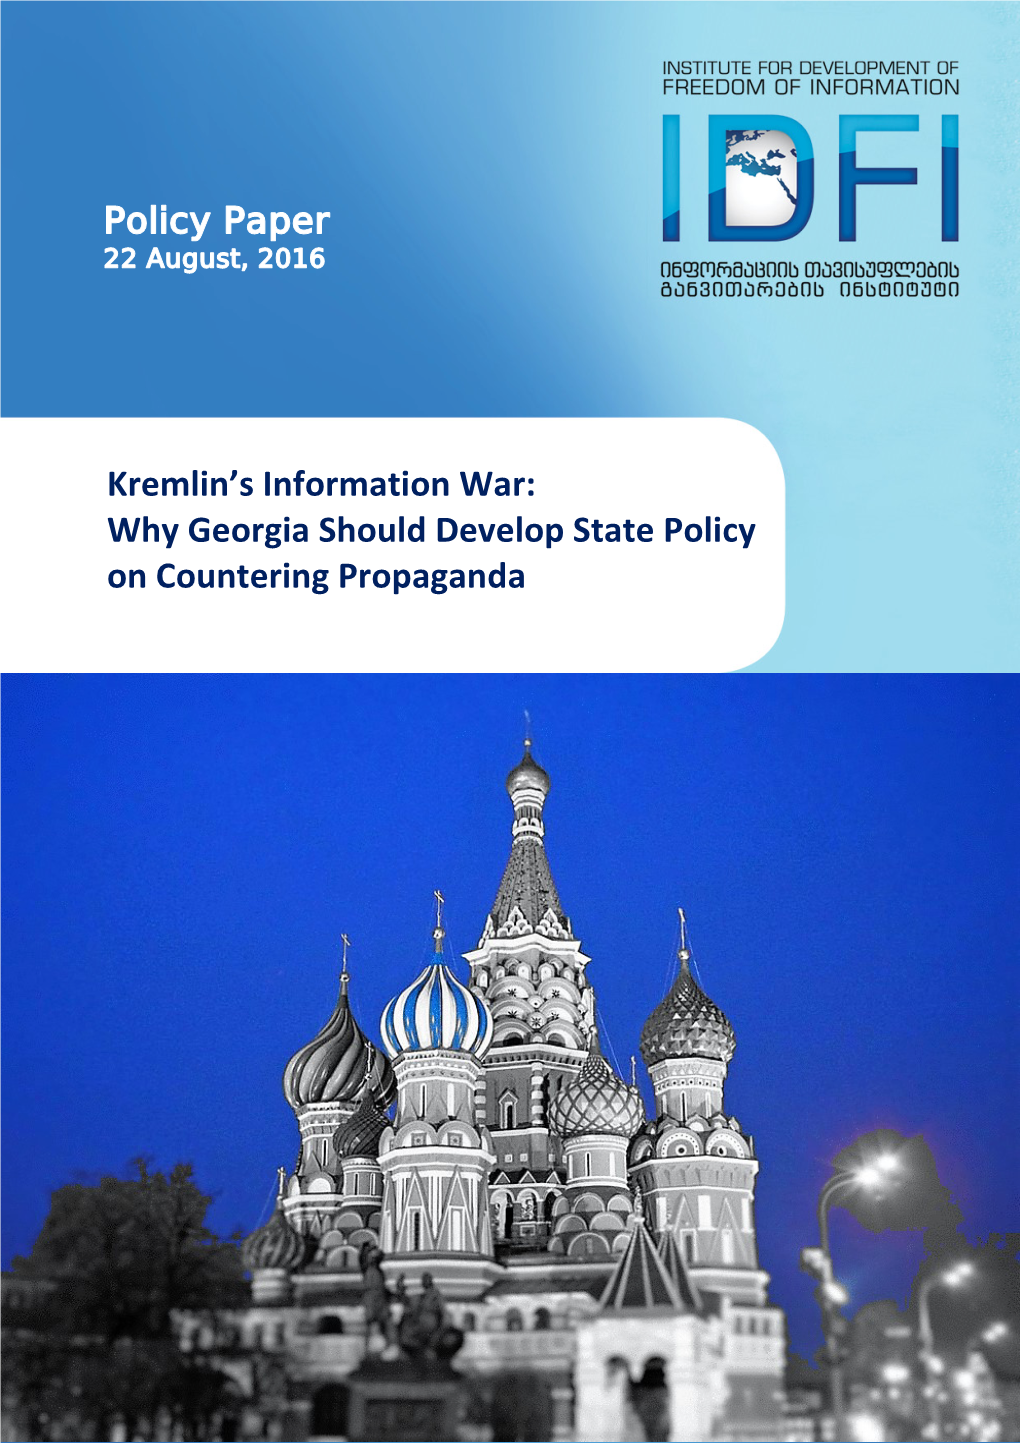 Policy Paper Kremlin's Information War: Why Georgia Should Develop State Policy on Countering Propaganda